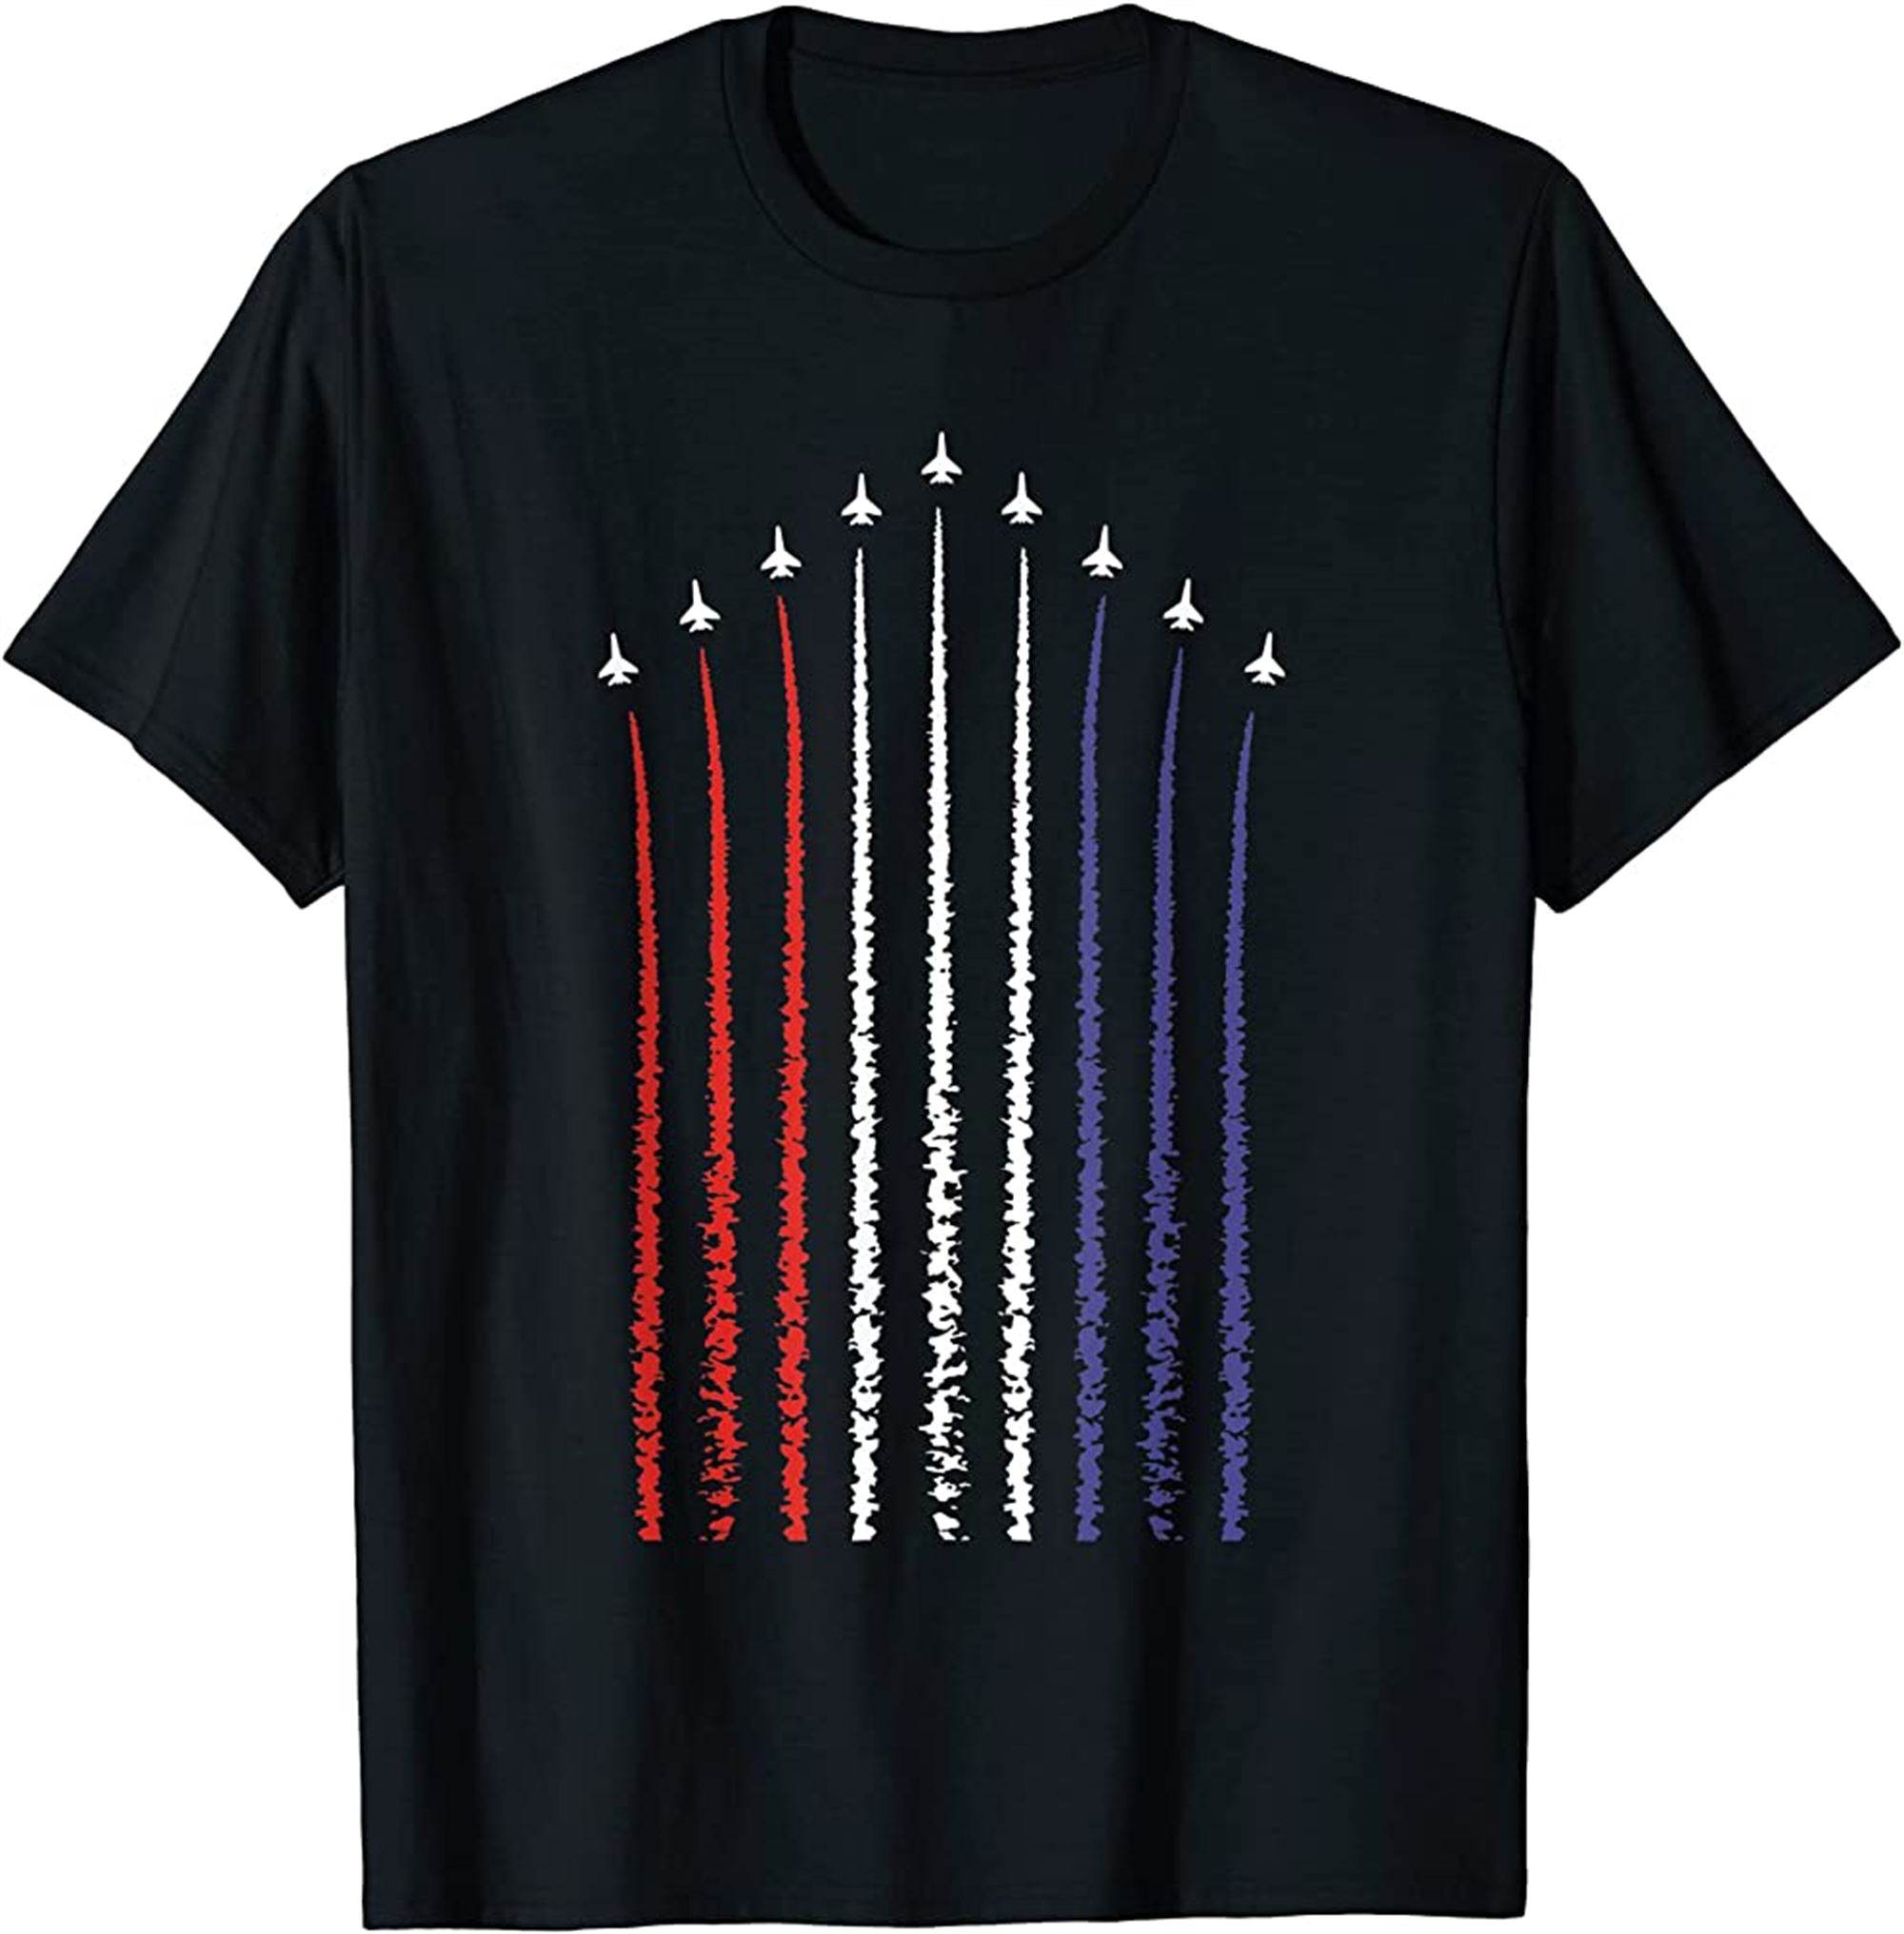 Us American Flag With Fighter Jets For 4th Of July T-shirt Plus Size Up To 5xl